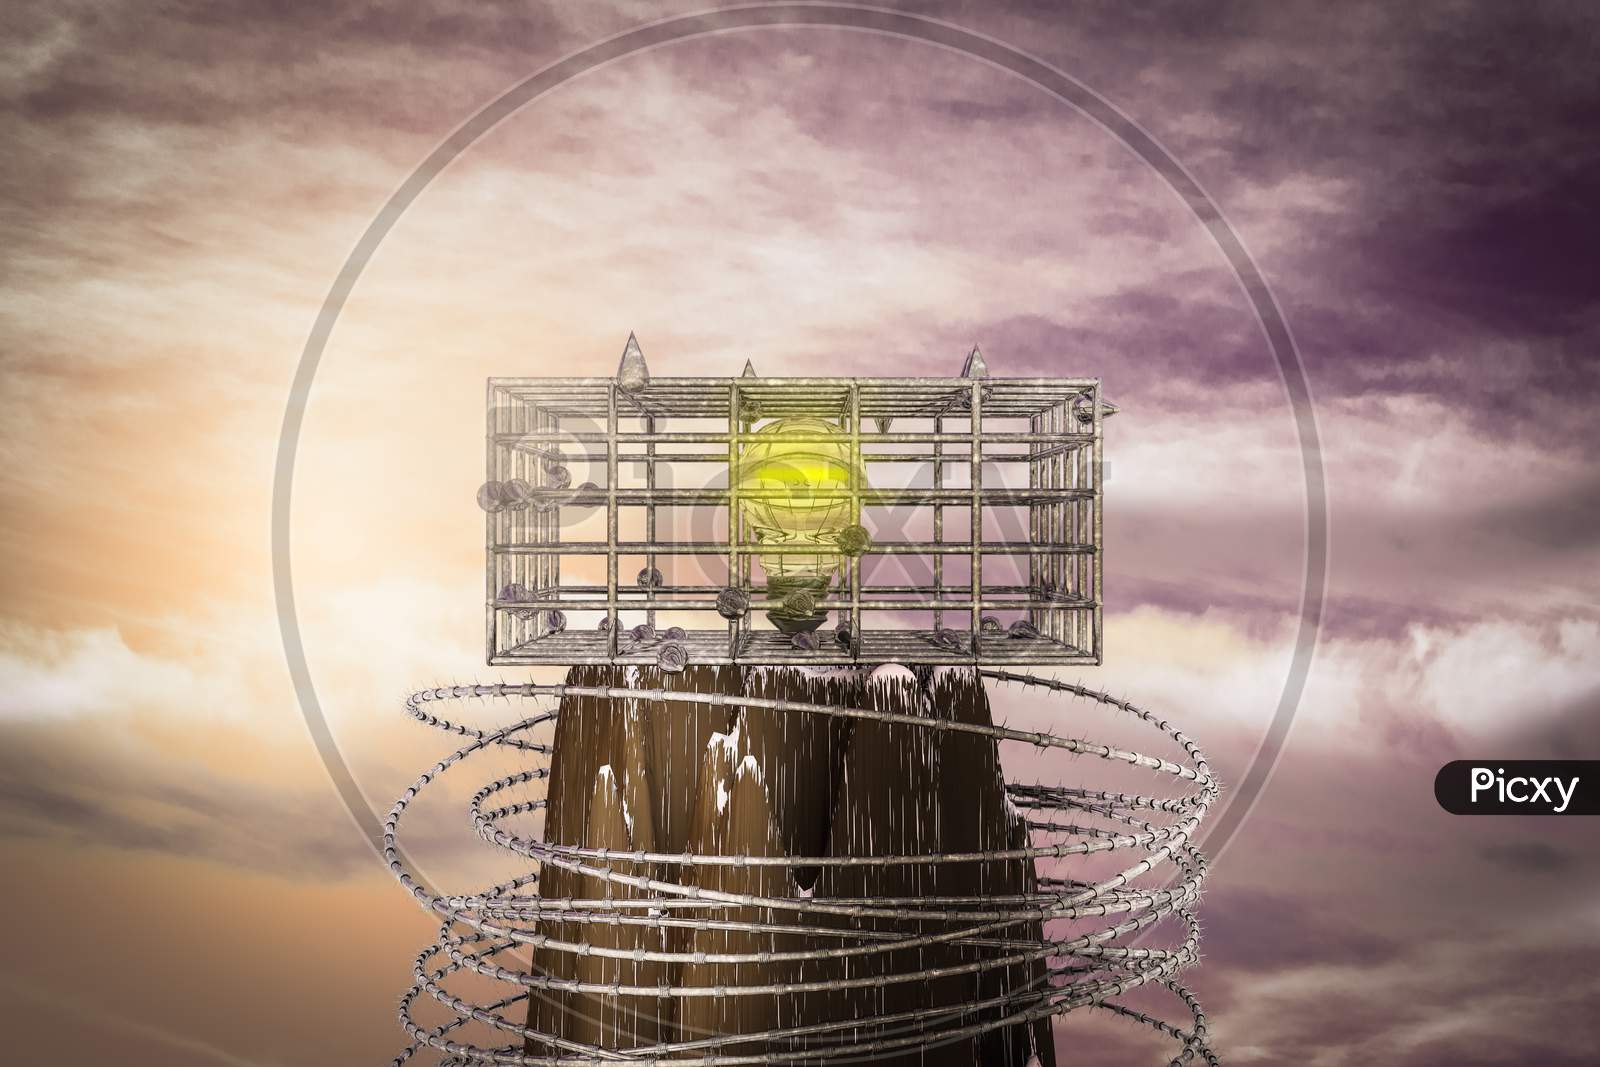 Light Bulb In A Cage On The Top Of A Mountain At Sunset Magenta Day. Light Bulb Is Prisoner In Metal Cage Or No Freedom For The Leader Or Business Finance Concept. 3D Illustration